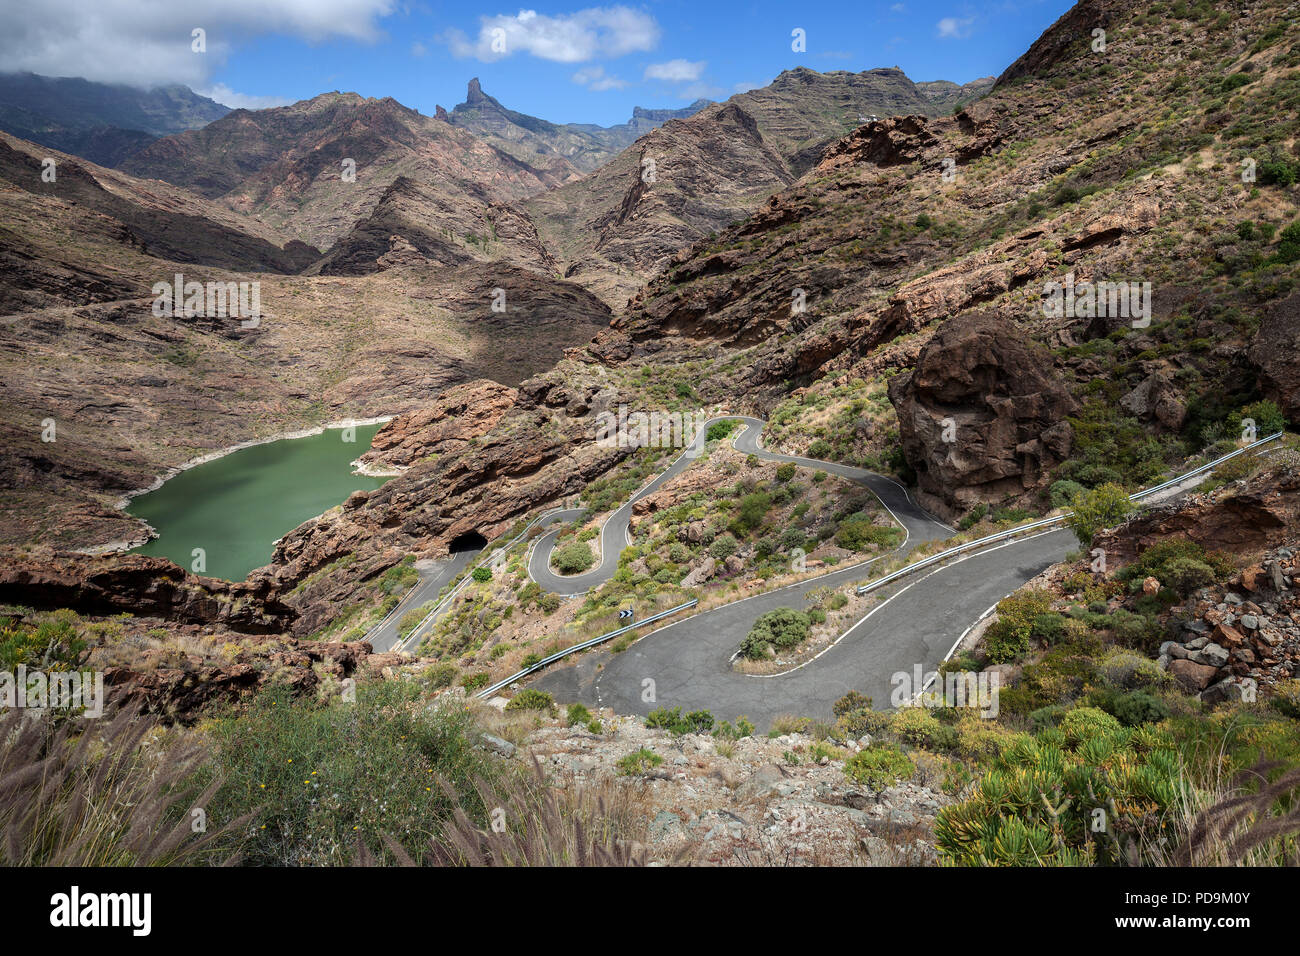 Volcanic barren mountain landscape with a view of the reservoir Presa del Parralillo, winding road GC606, at El Carrizal Stock Photo